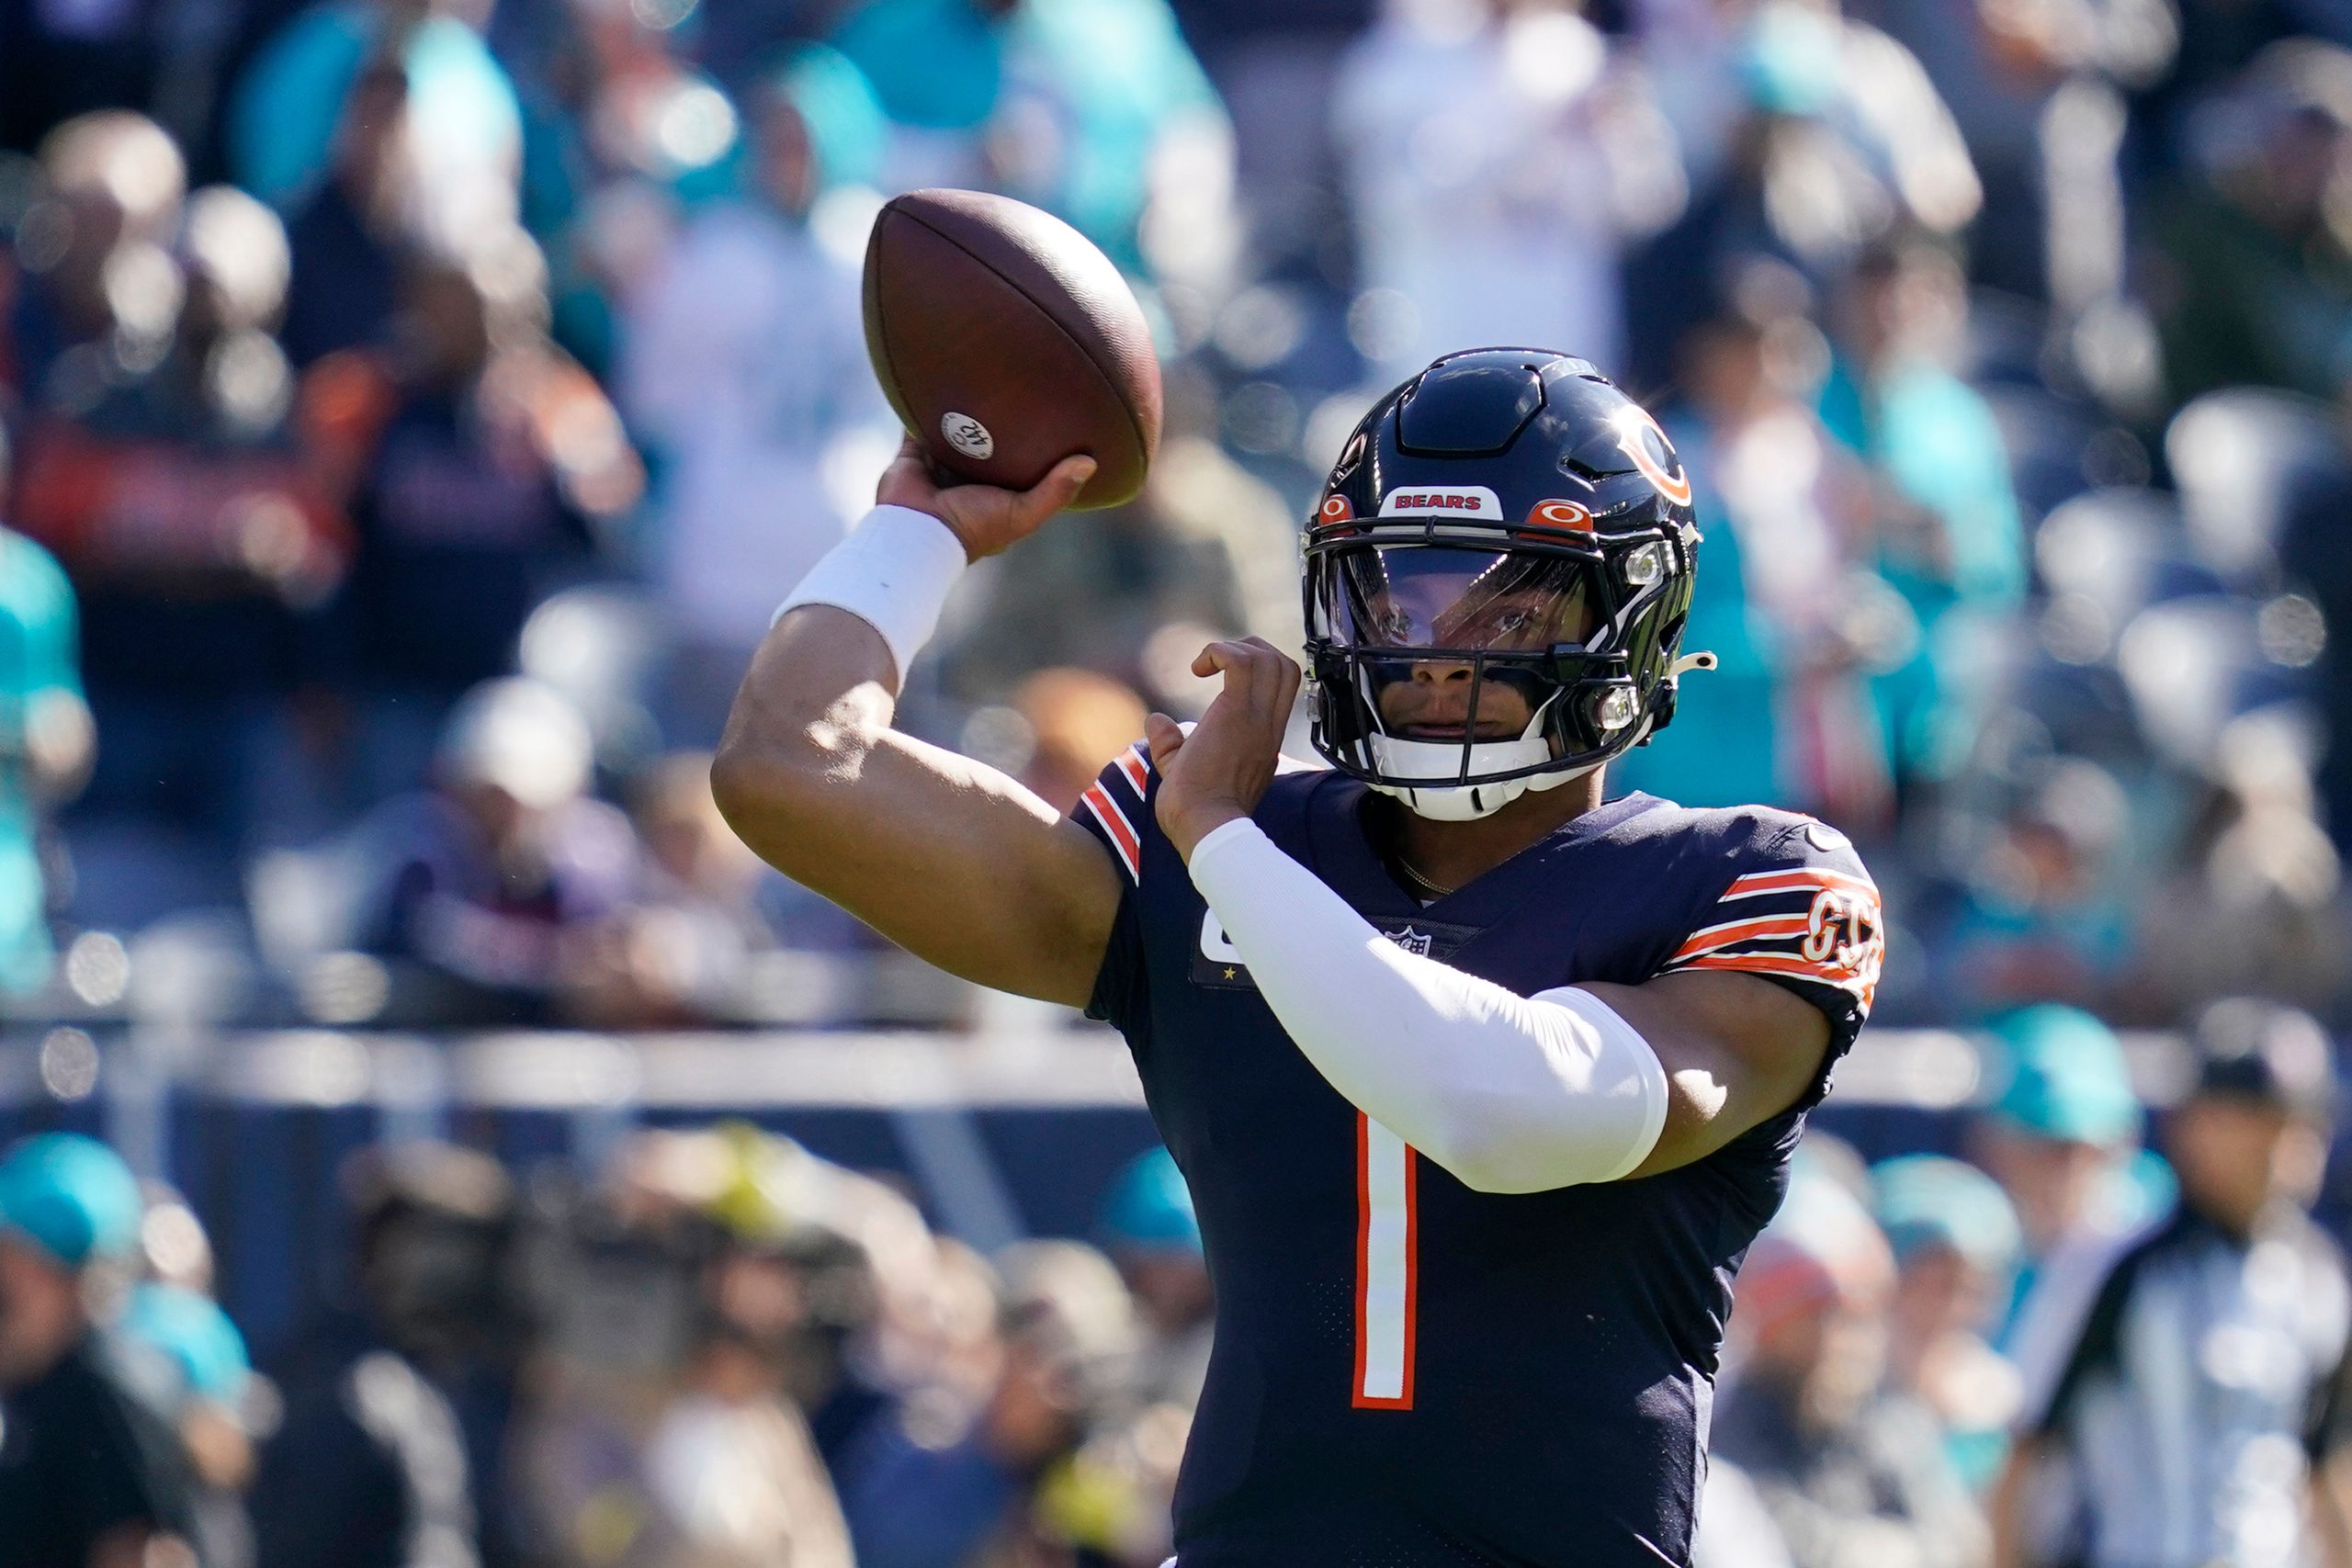 Justin Fields scores a touchdown in Chicago Bears vs Tampa Bay Buccaneers: Watch Video